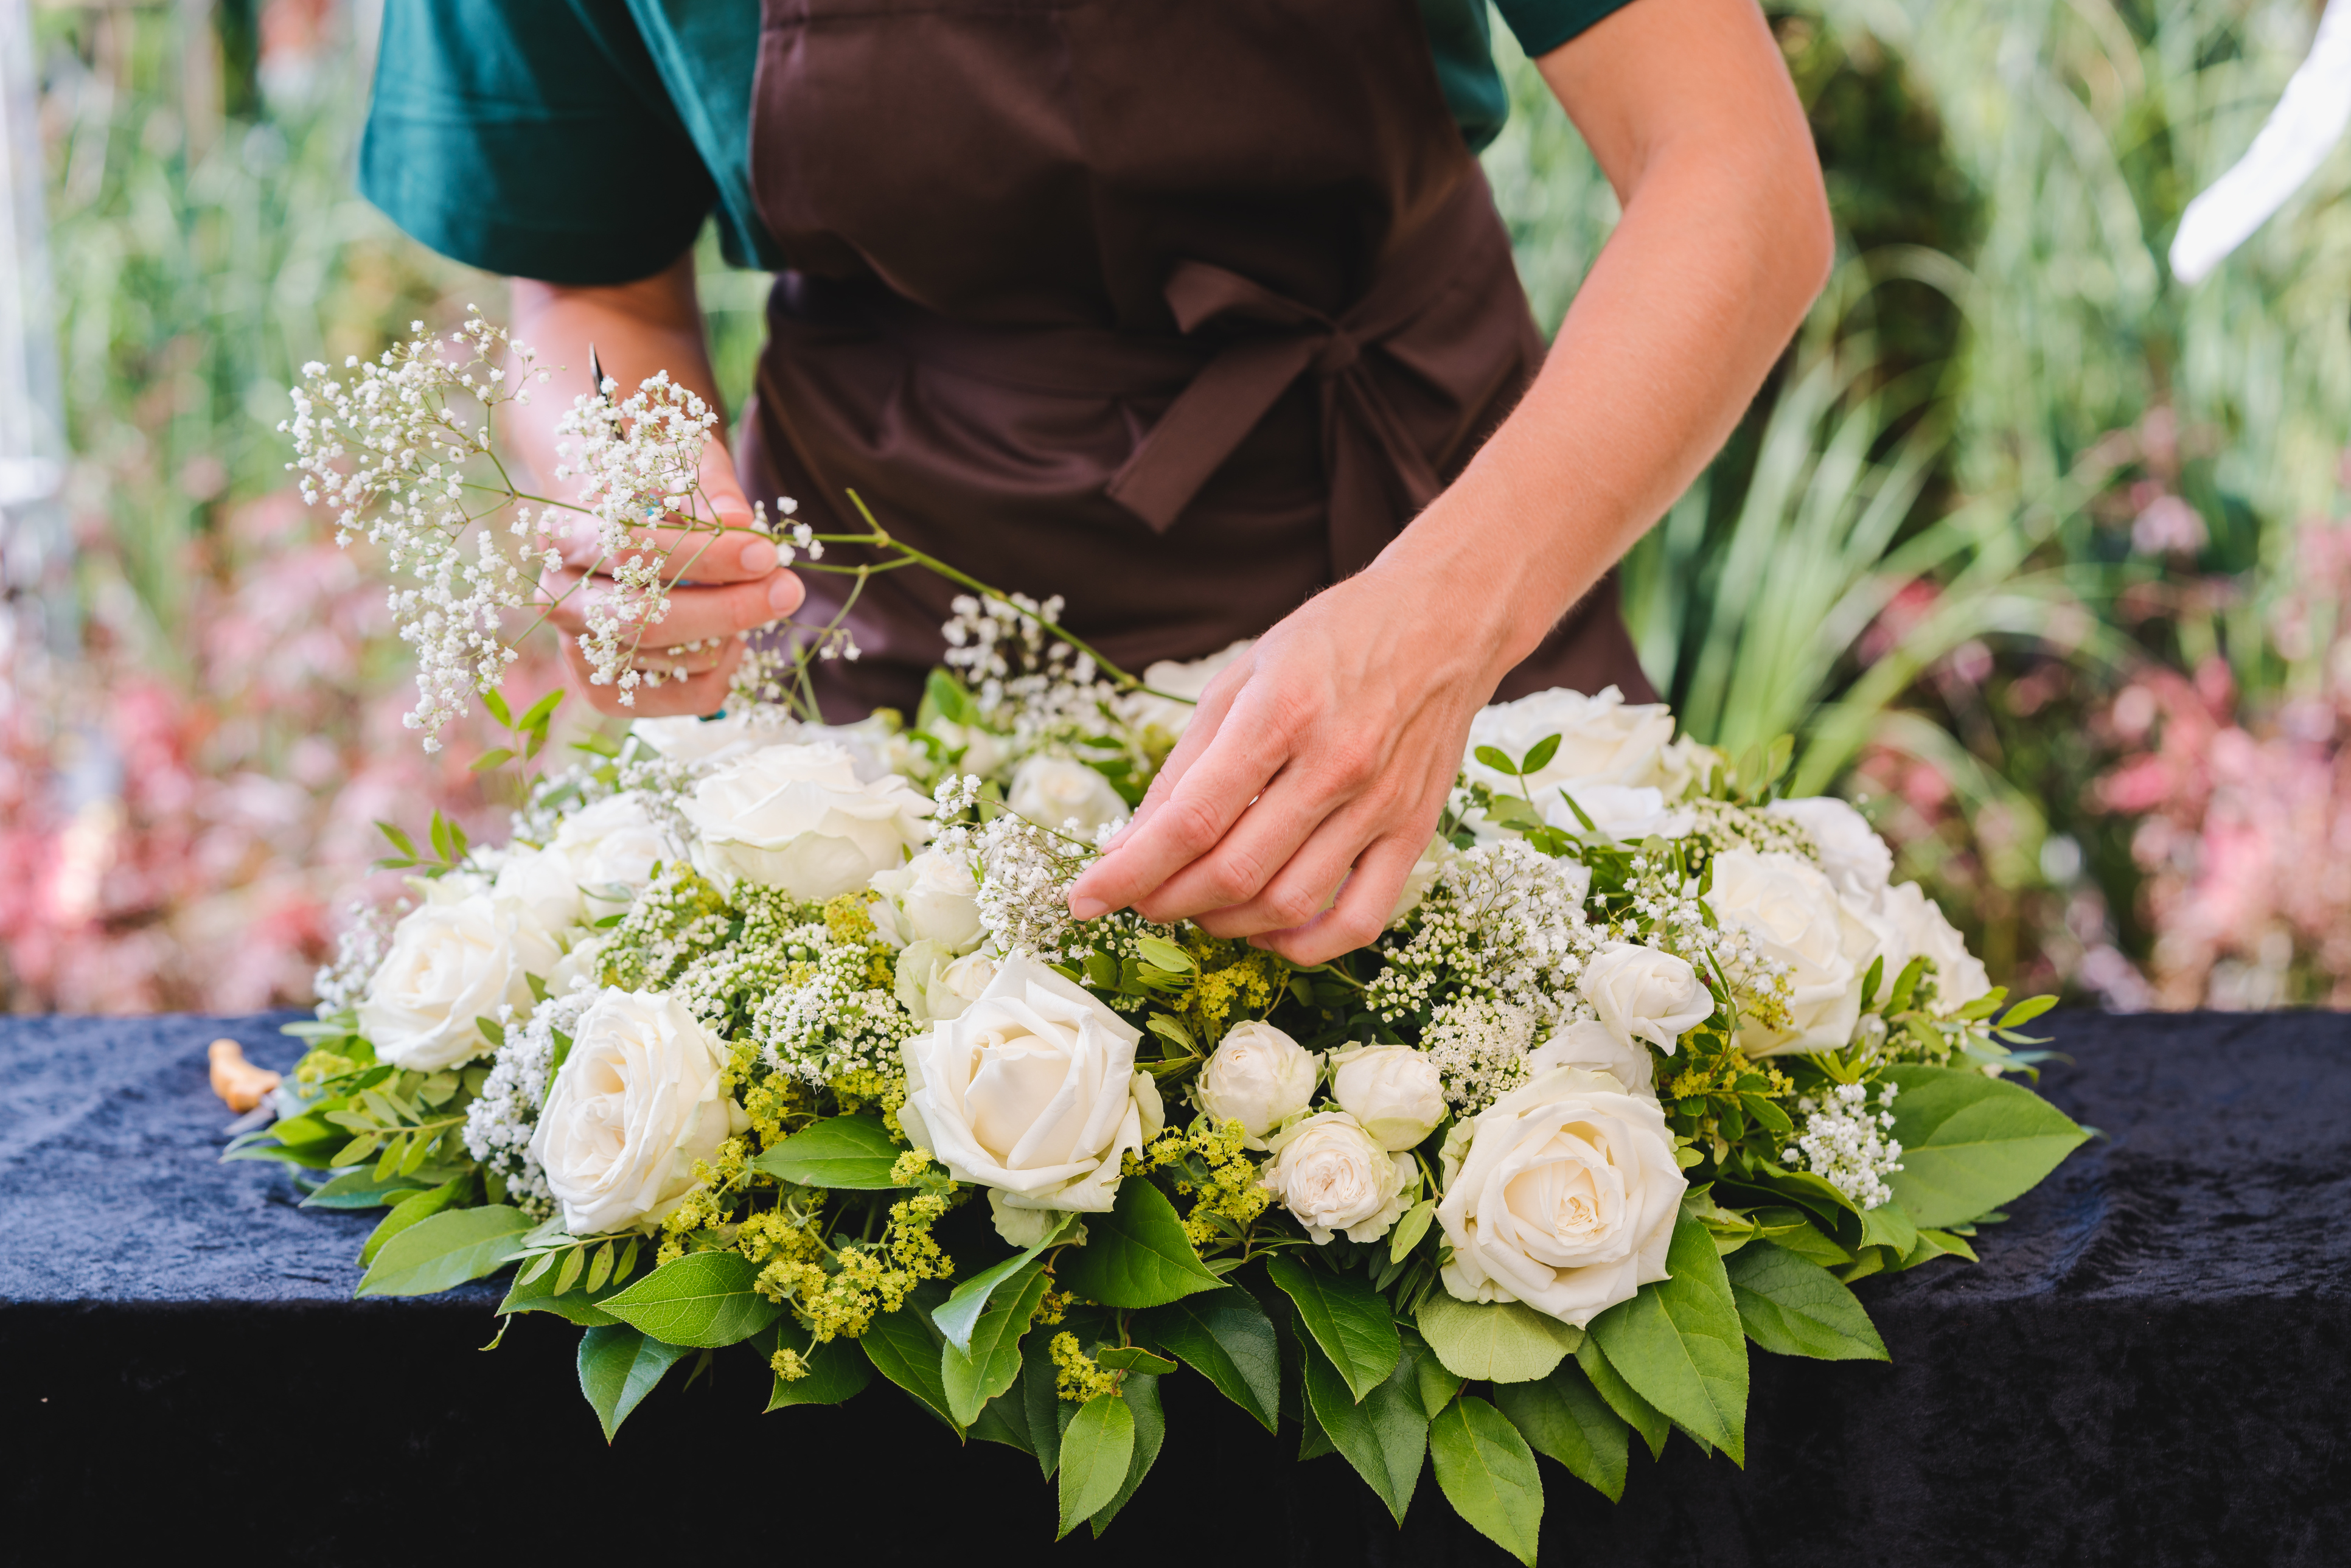  Ideas on what to do with funeral flowers after a funeral